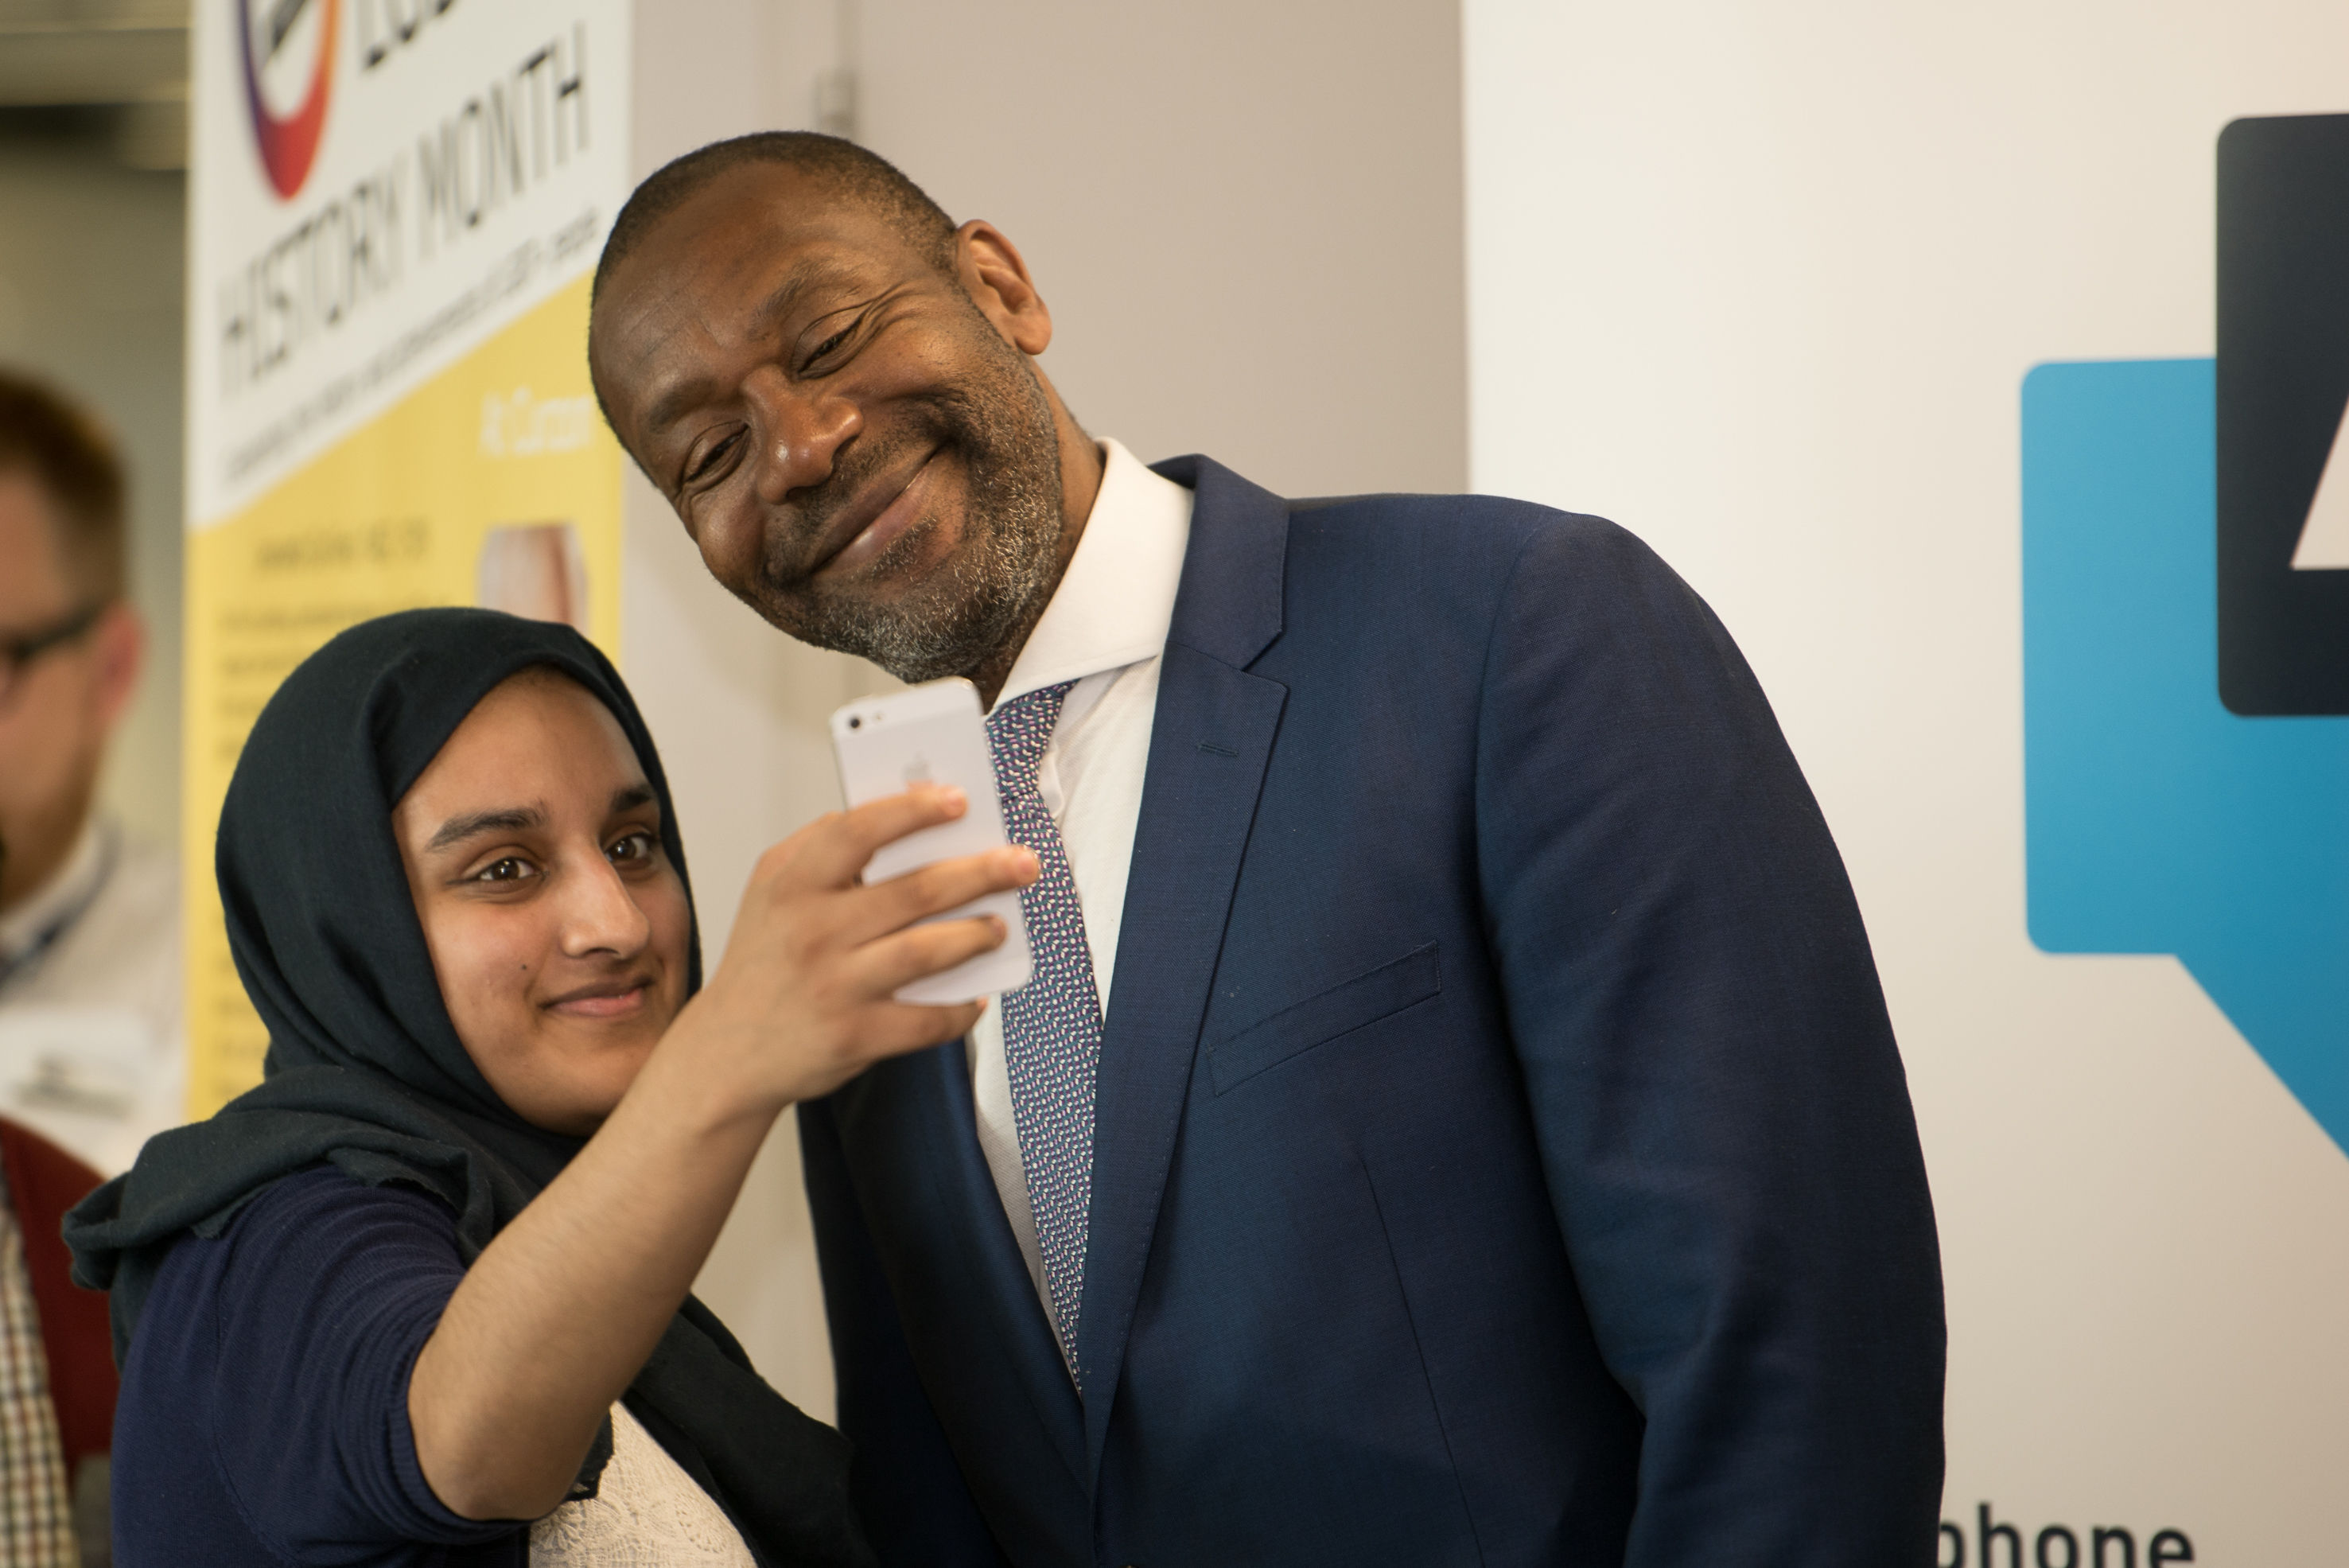 Sir Lenny Henry visited Birmingham City University after being made chancellor last year.